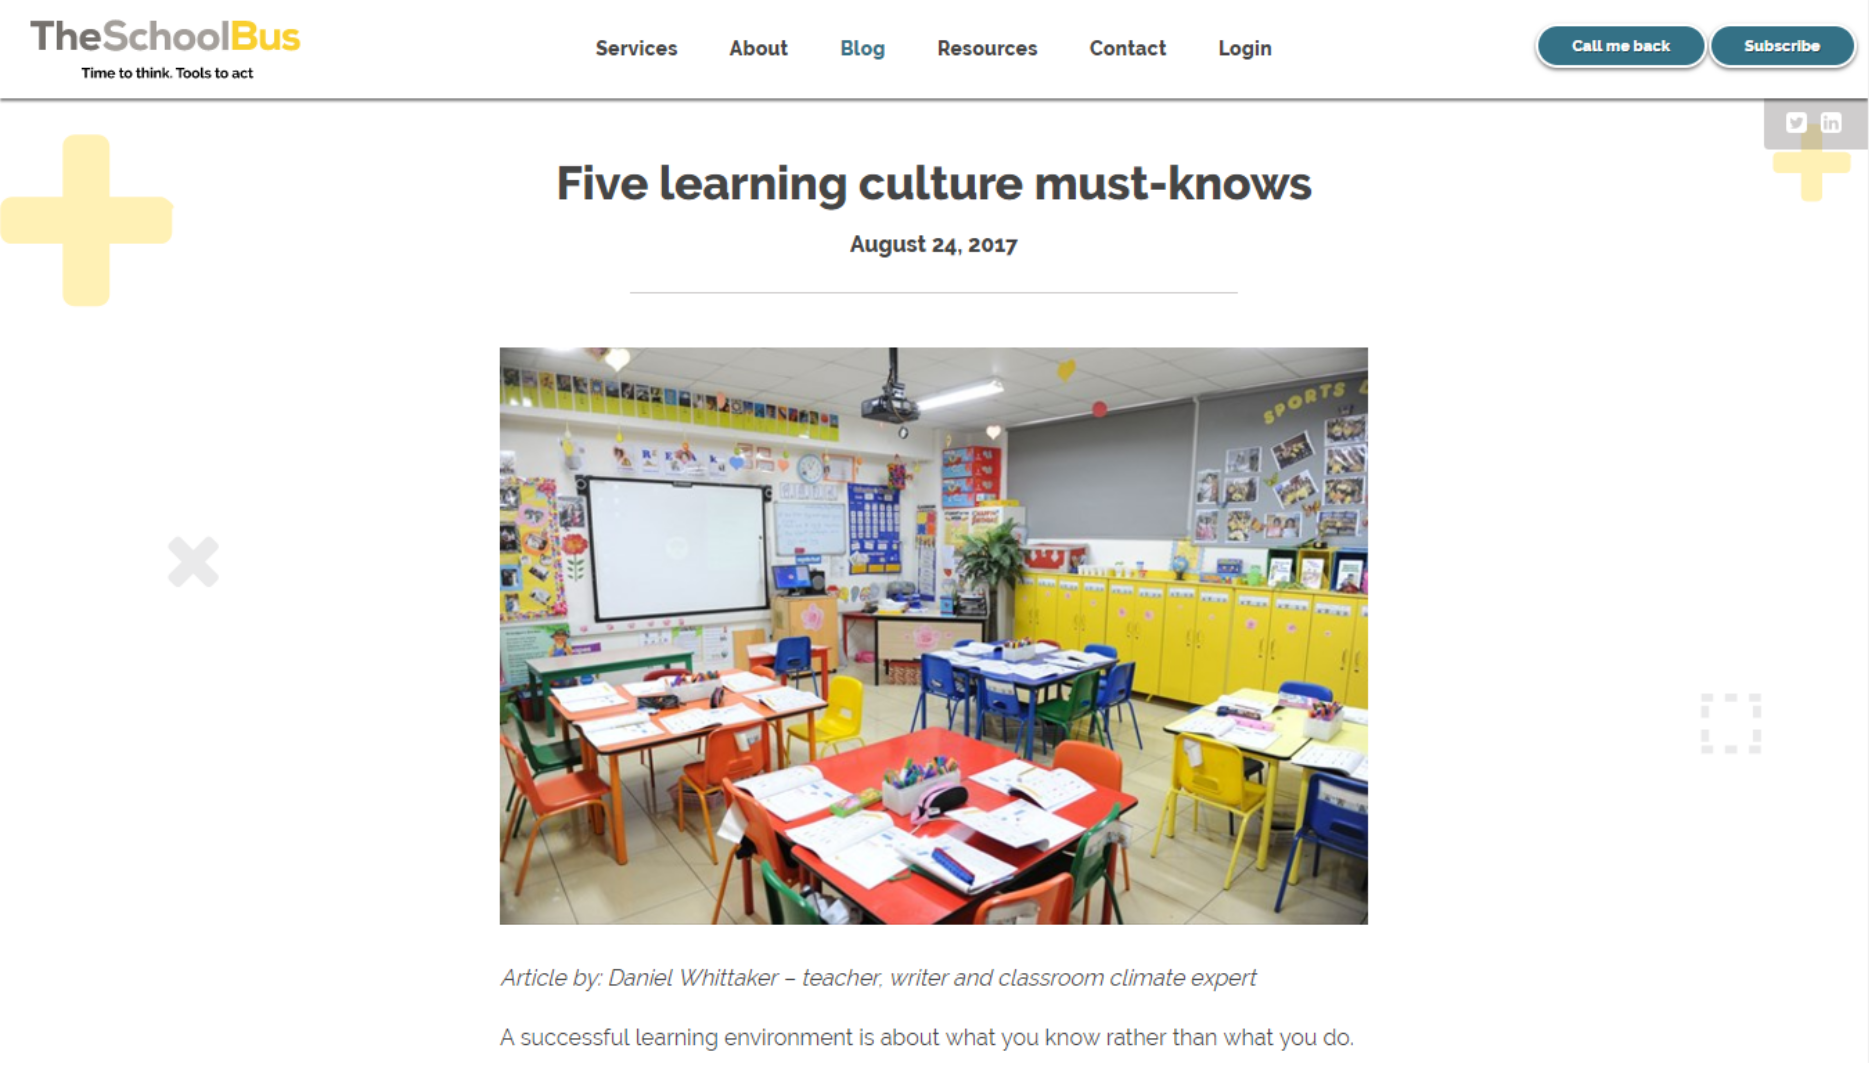 5 learning culture must-knows - The School Bus - Pic